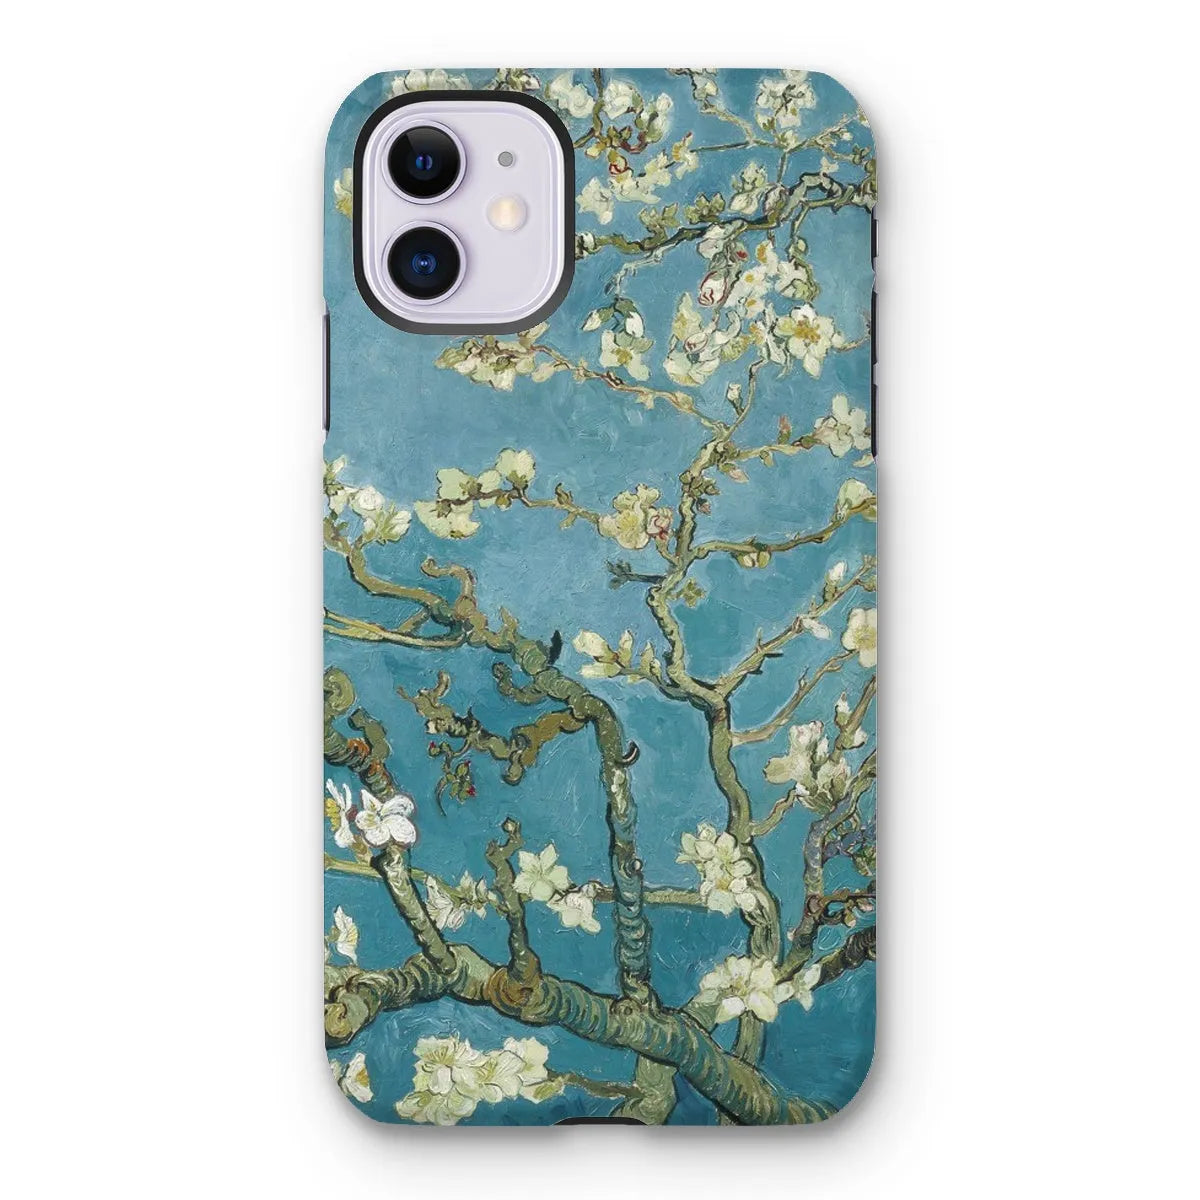 Almond Blossom - Vincent Van Gogh Aesthetic Phone Case - Iphone 11 / Matte - Mobile Phone Cases - Aesthetic Art